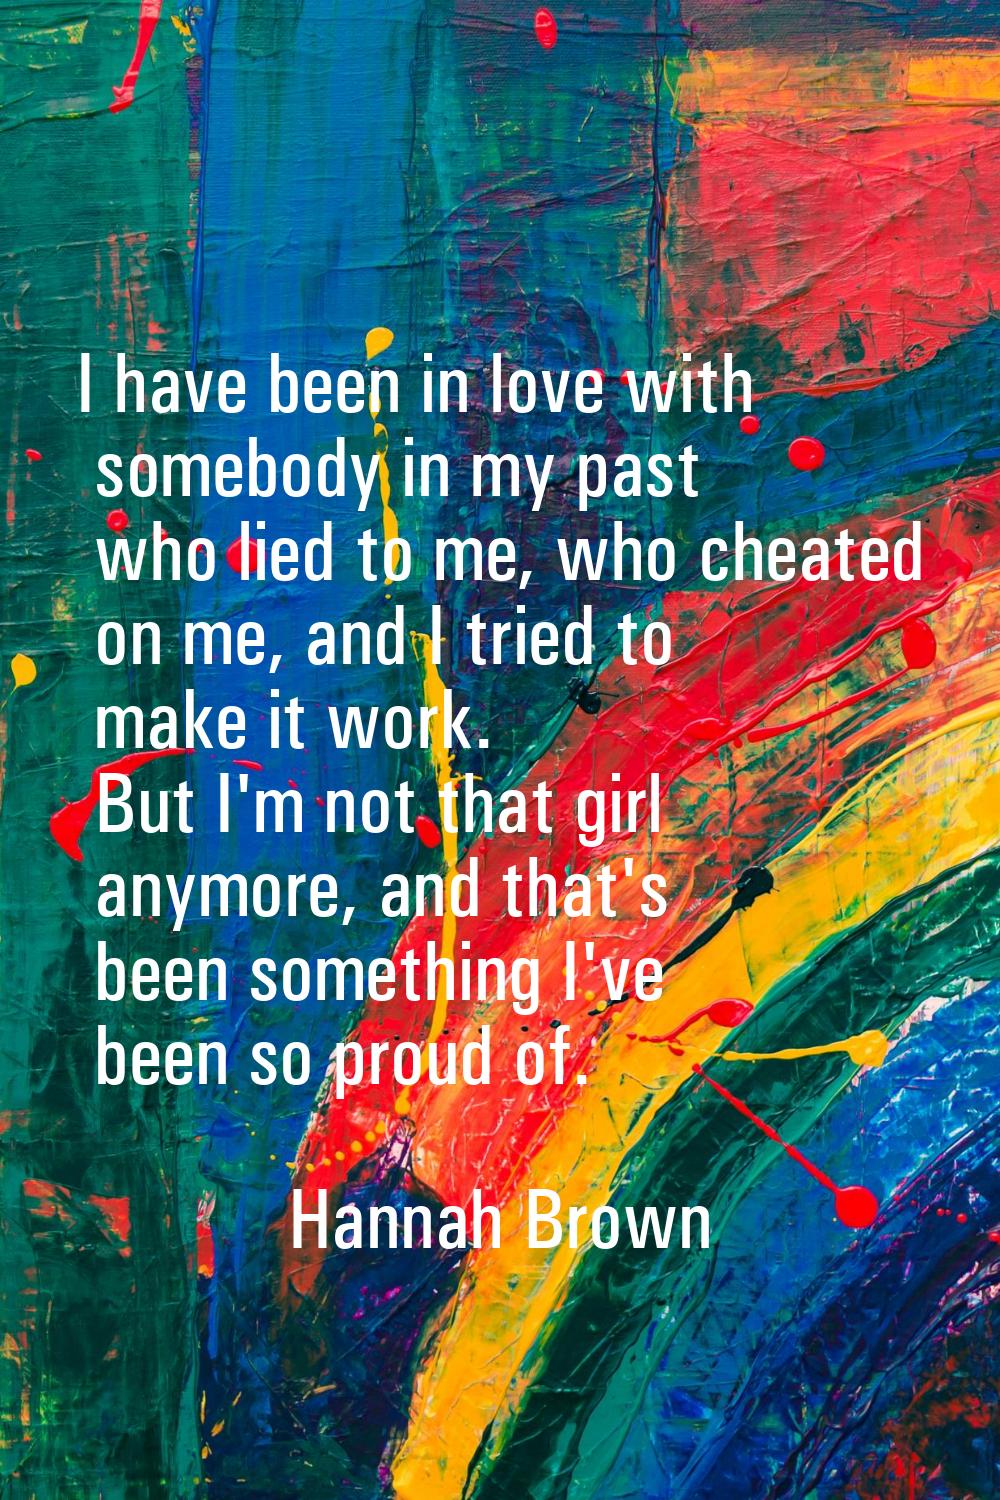 I have been in love with somebody in my past who lied to me, who cheated on me, and I tried to make